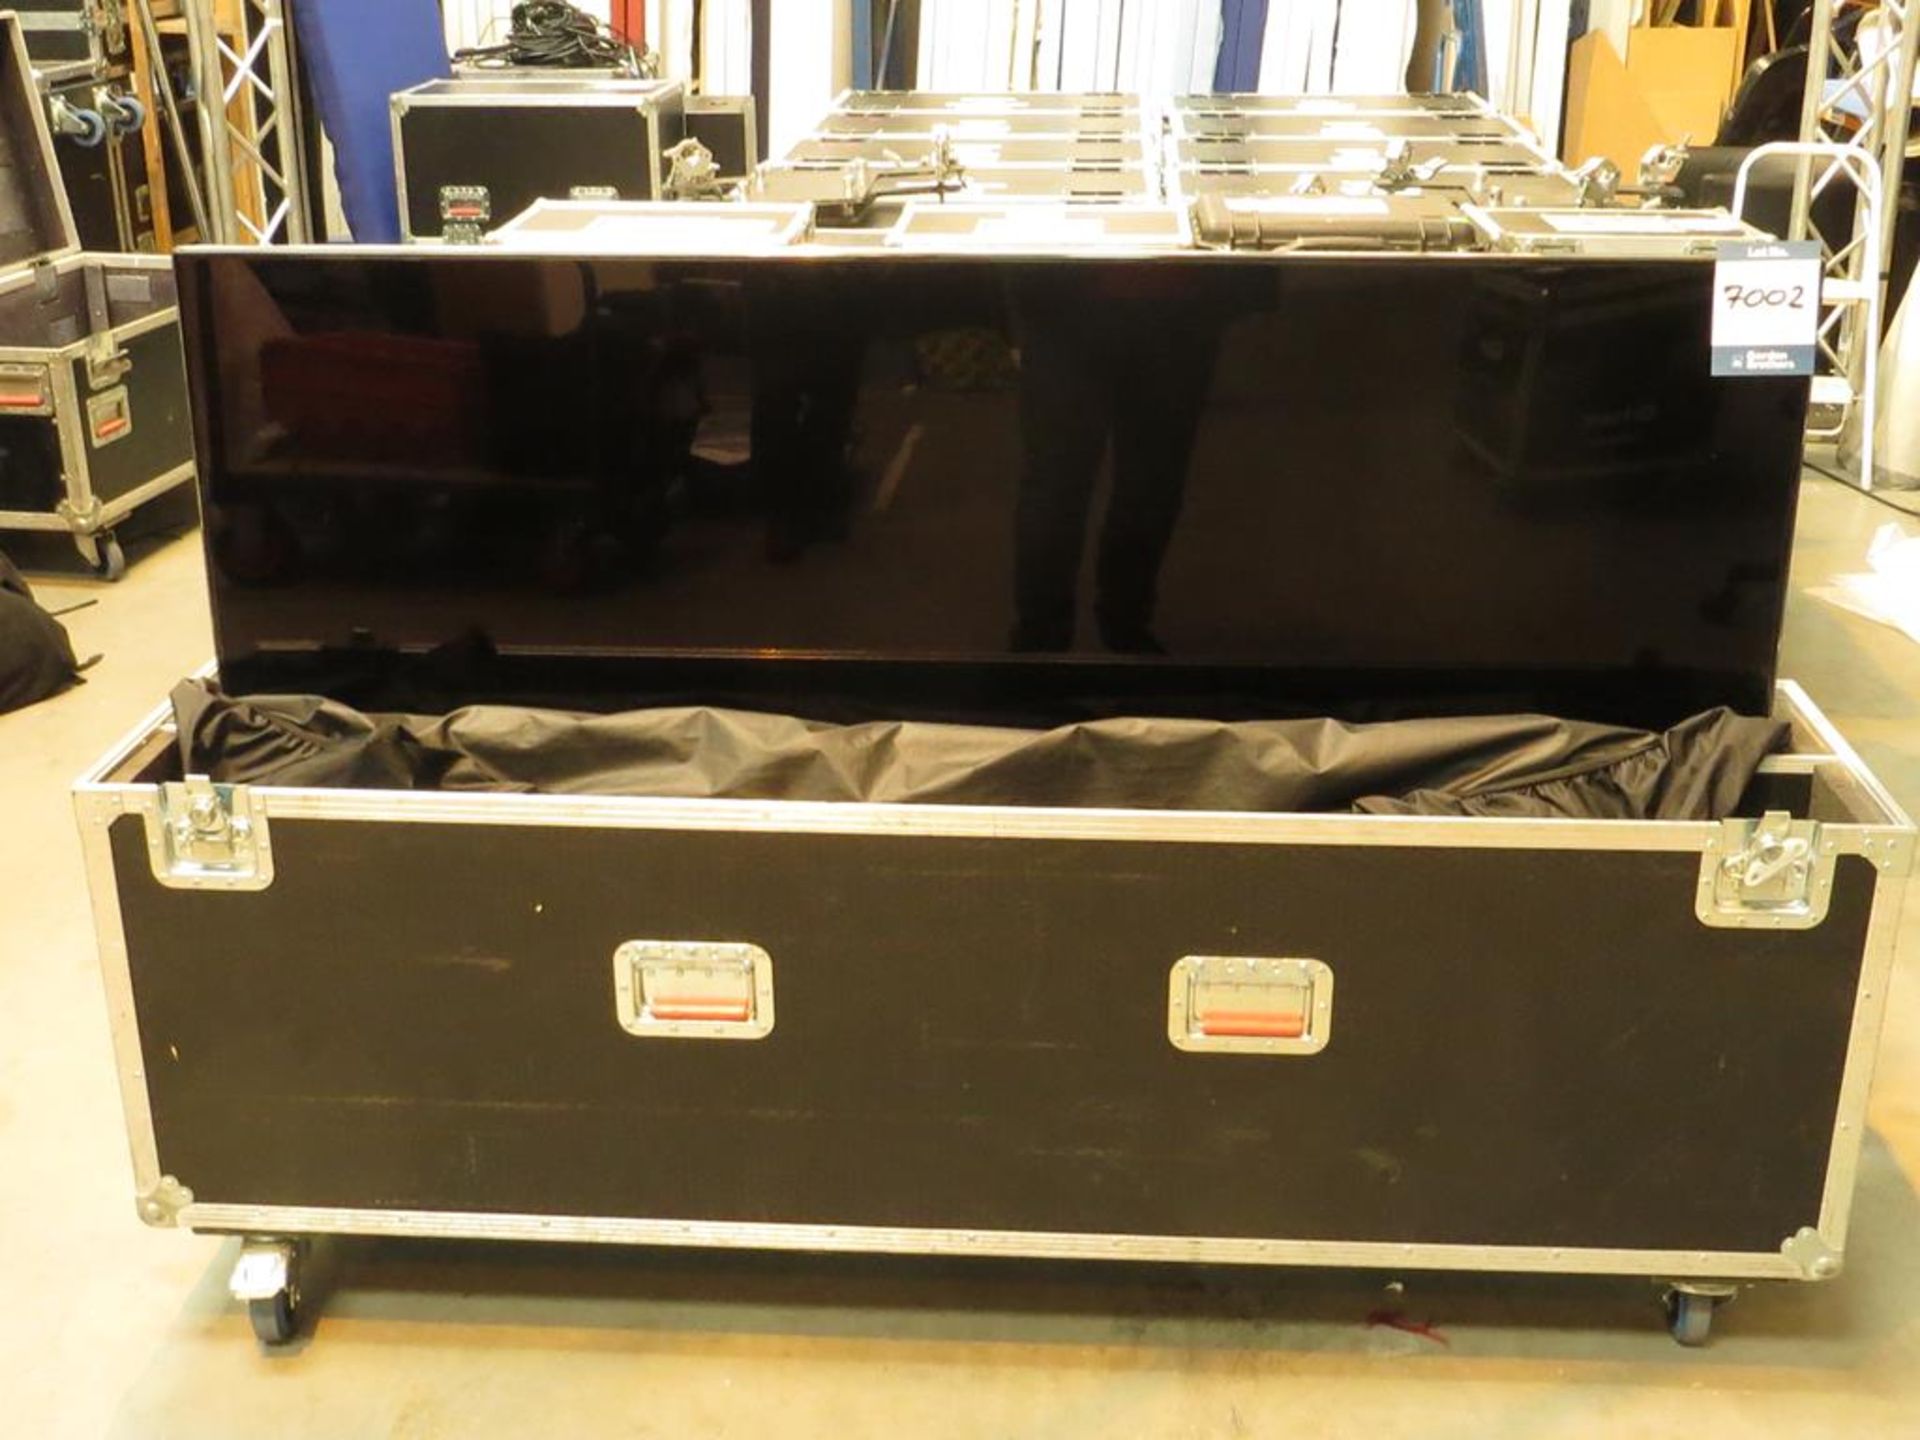 Samsung, 75" LED screen with remote control, power lead,Unicol backplate, Exactmatch feet in transit - Image 2 of 3